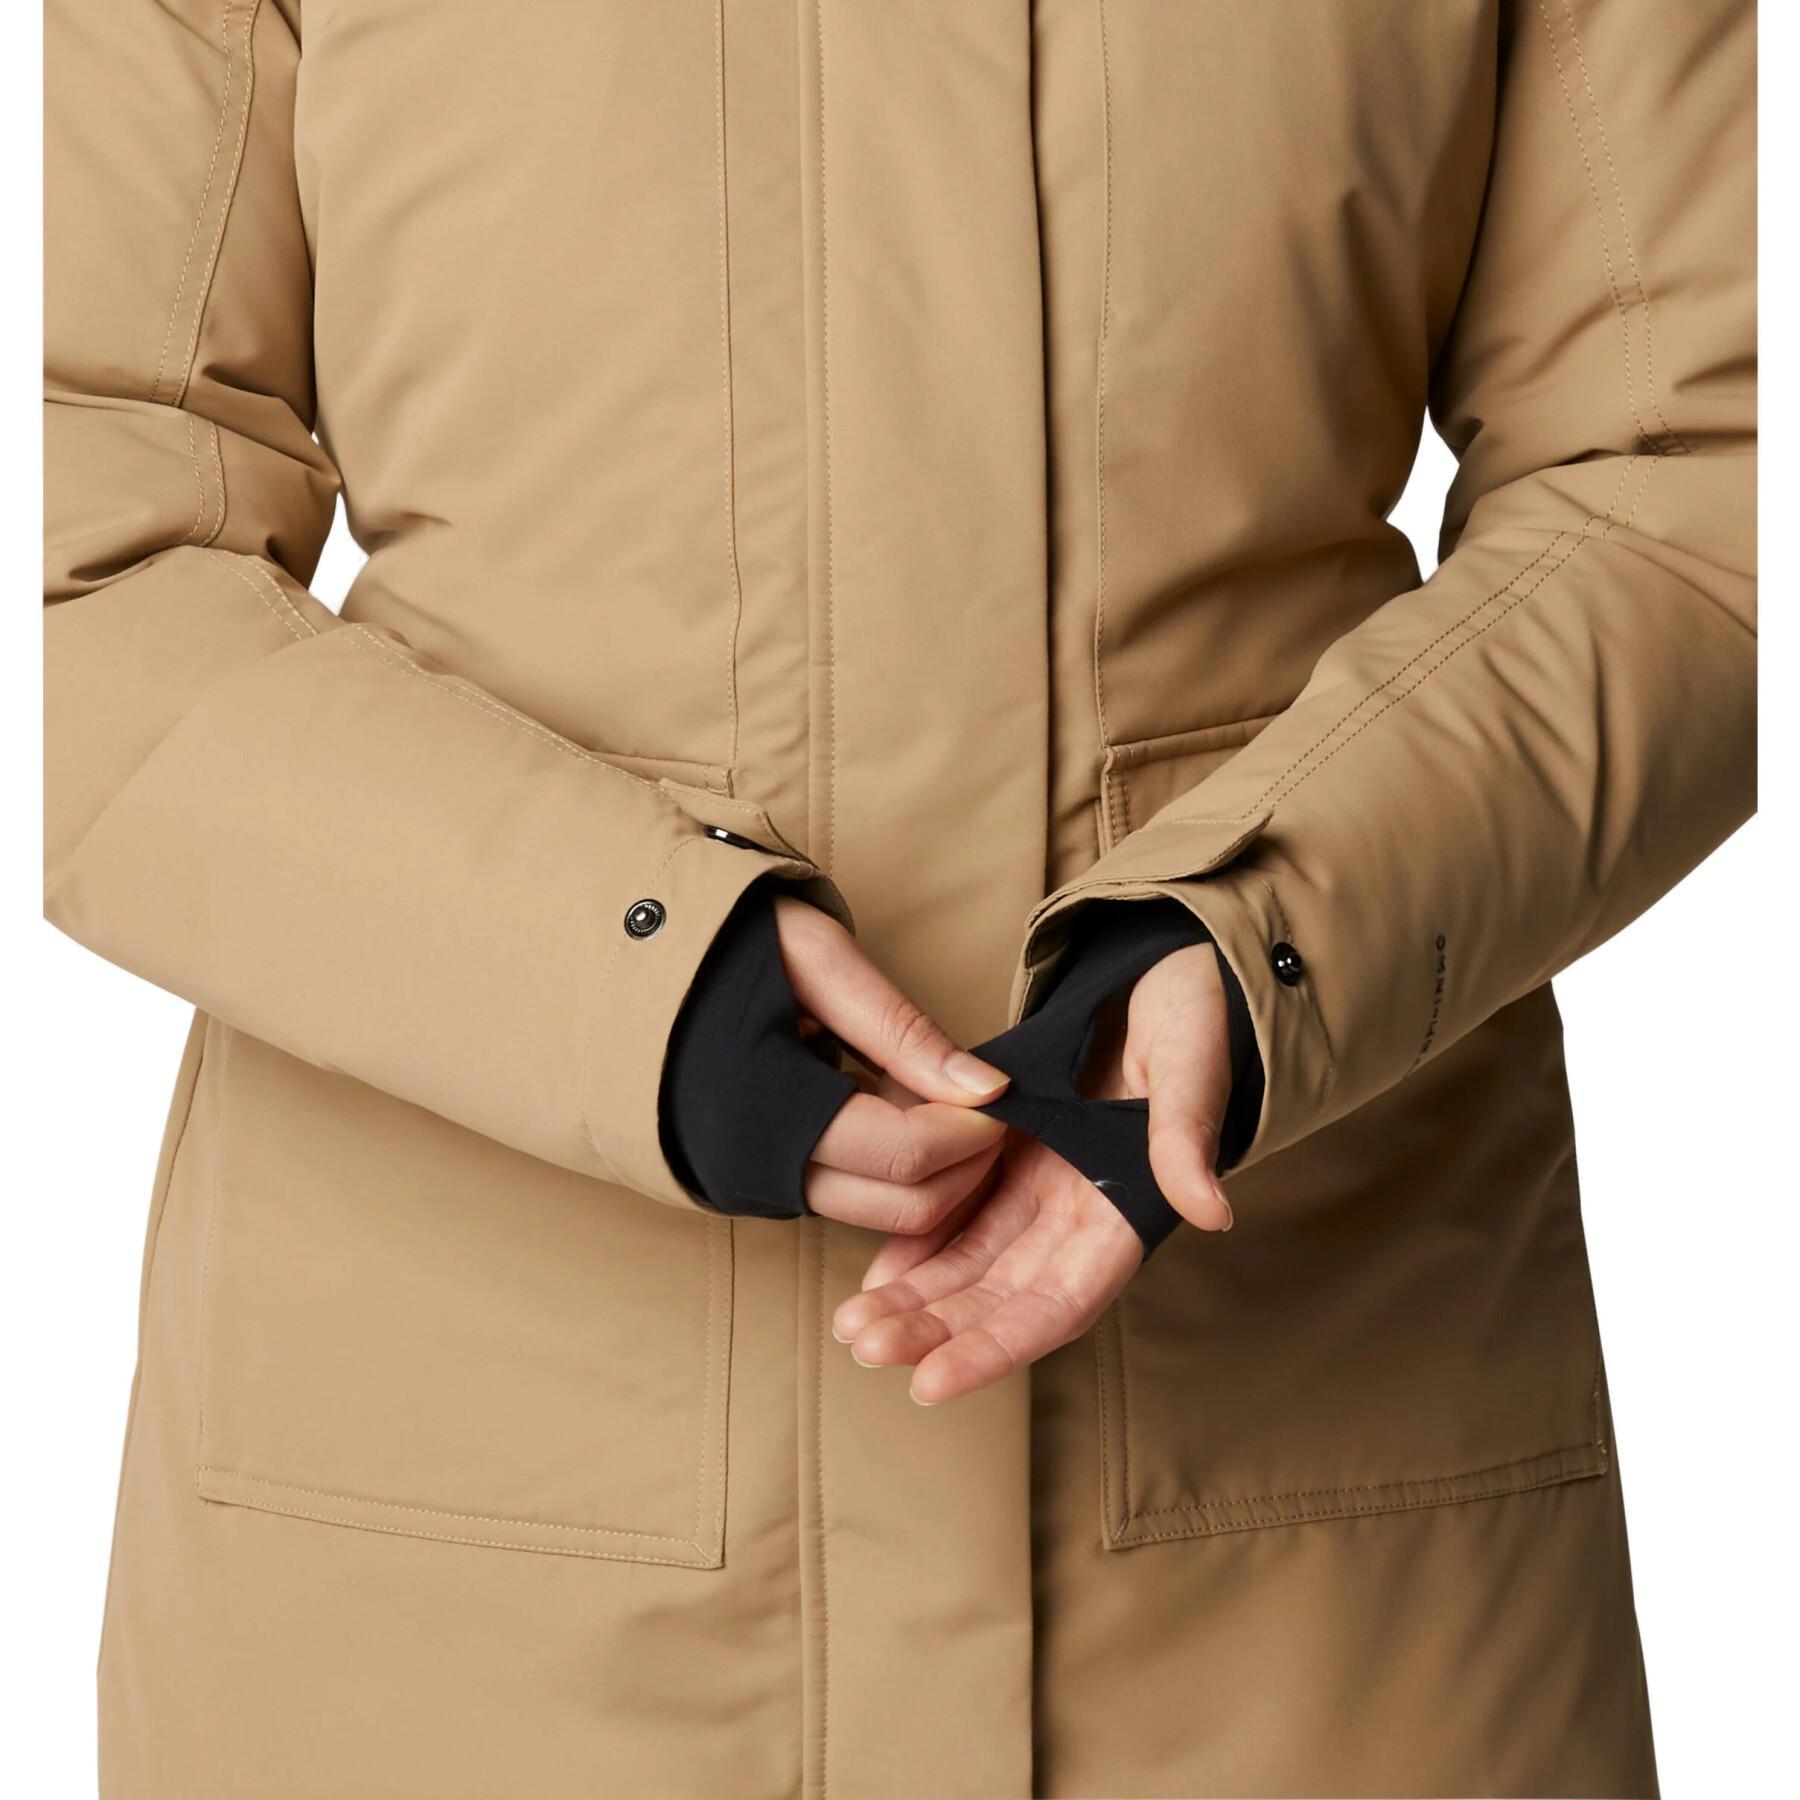 Parka imperméable femme Columbia Little Si Insulated